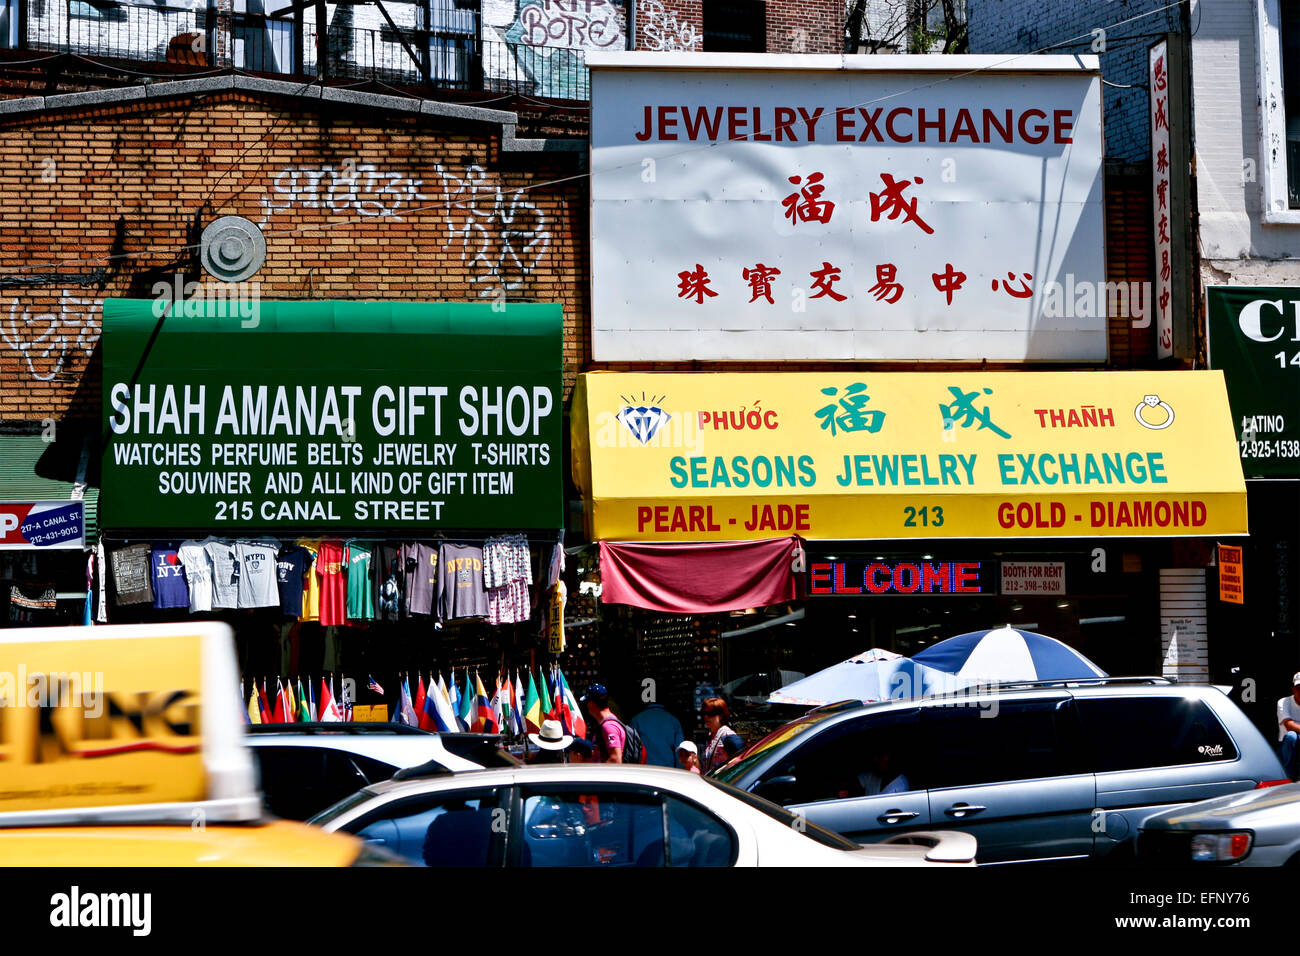 Shops in bustling Chinatown, picturesque neighborhood. Chinese community. Shopping, traffic. Manhattan, New York, NY, USA, United States of America. Stock Photo